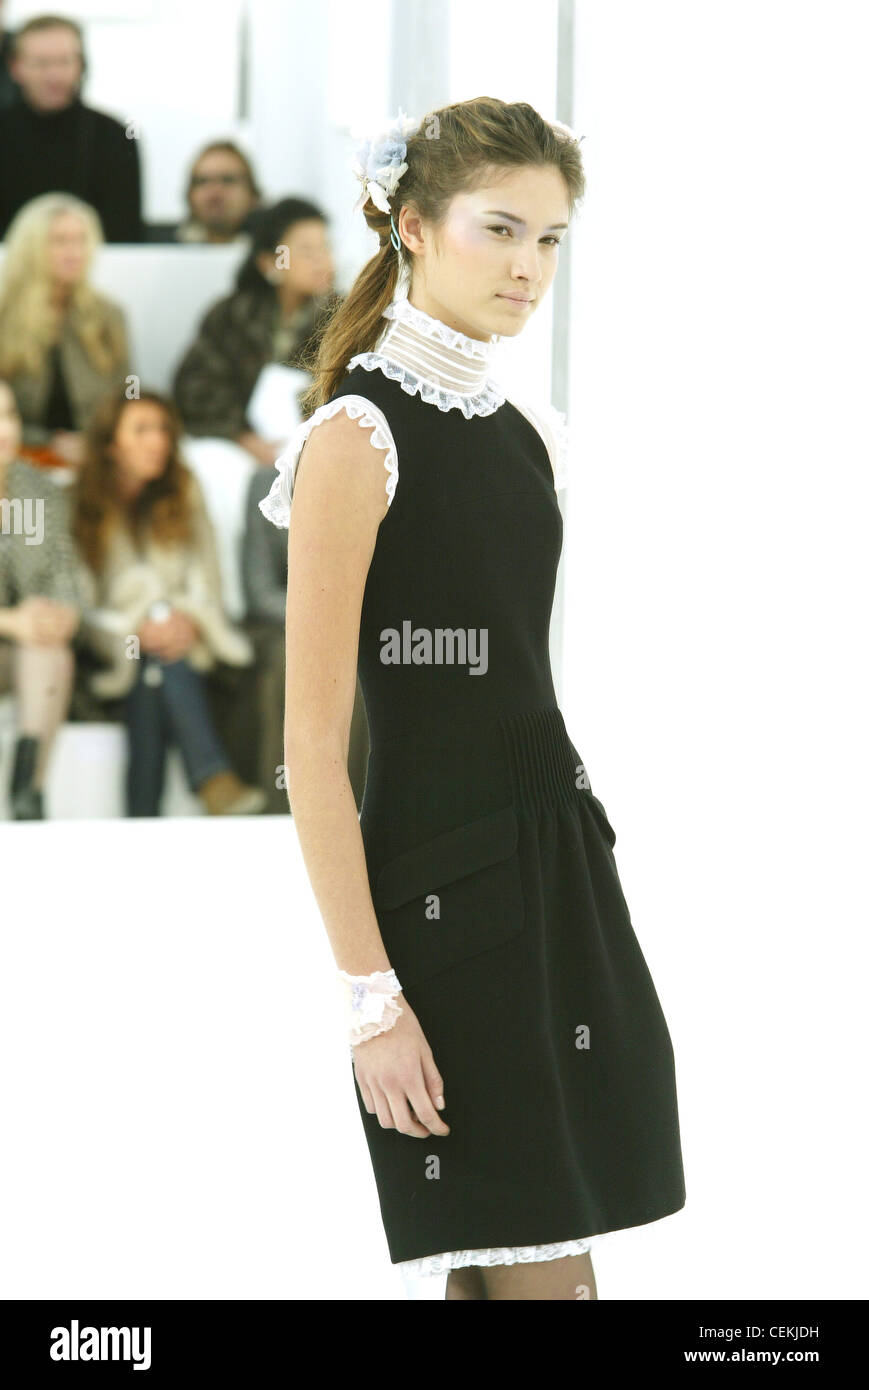 Haute Couture Chanel Spring Summer Paris Blonde female wearing a mid thigh  length black sleeveless dress white organdy ruffle Stock Photo - Alamy